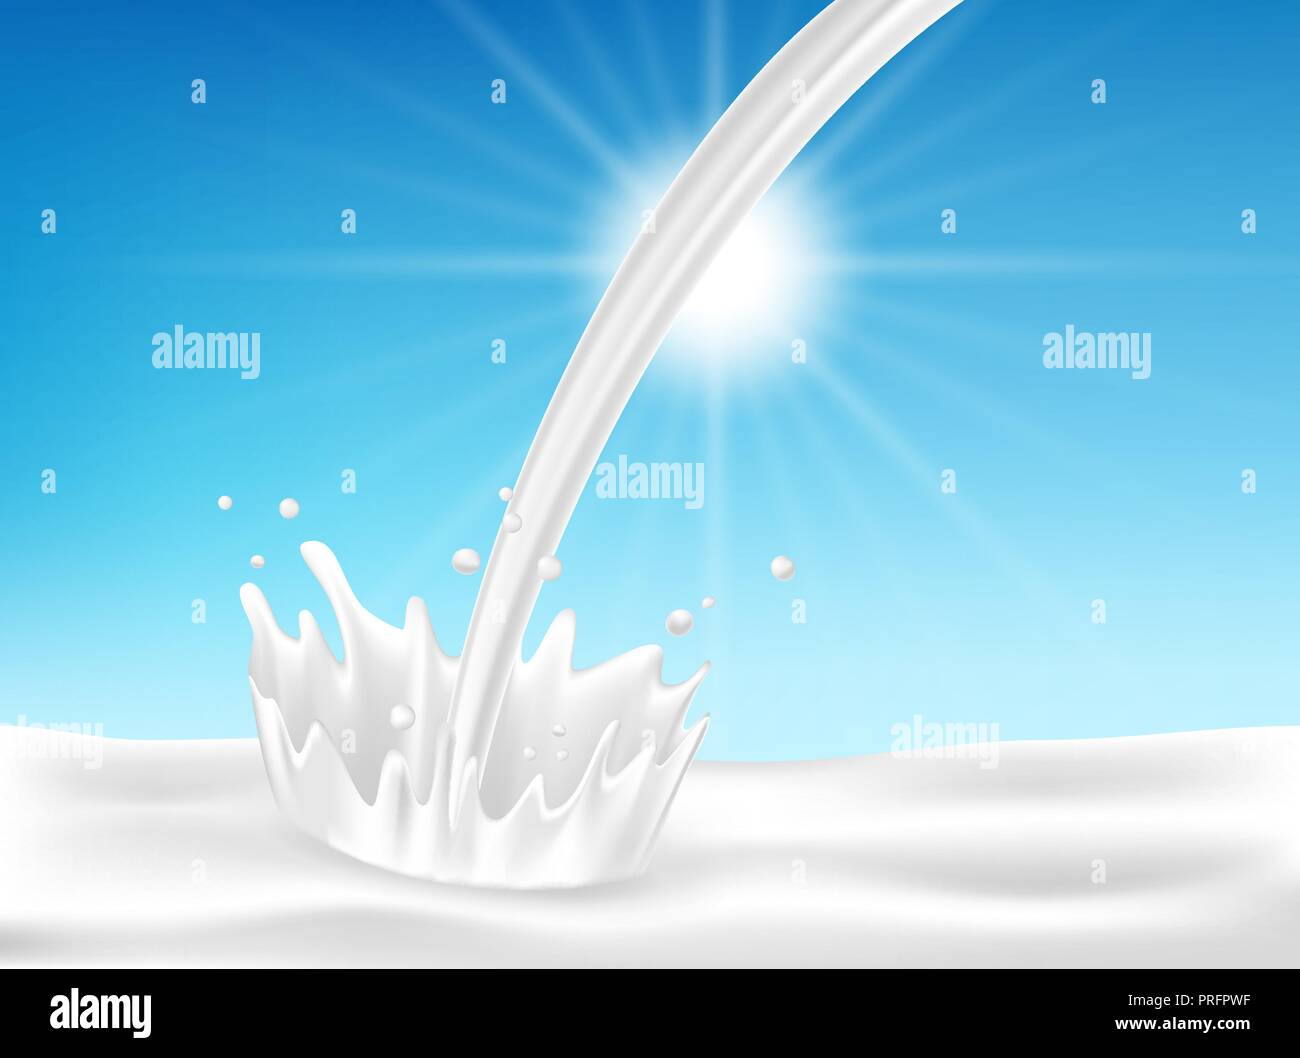 Milk or yogurt pouring down with splash and realistic milk drop isolated on blue background. vector illustration Stock Vector